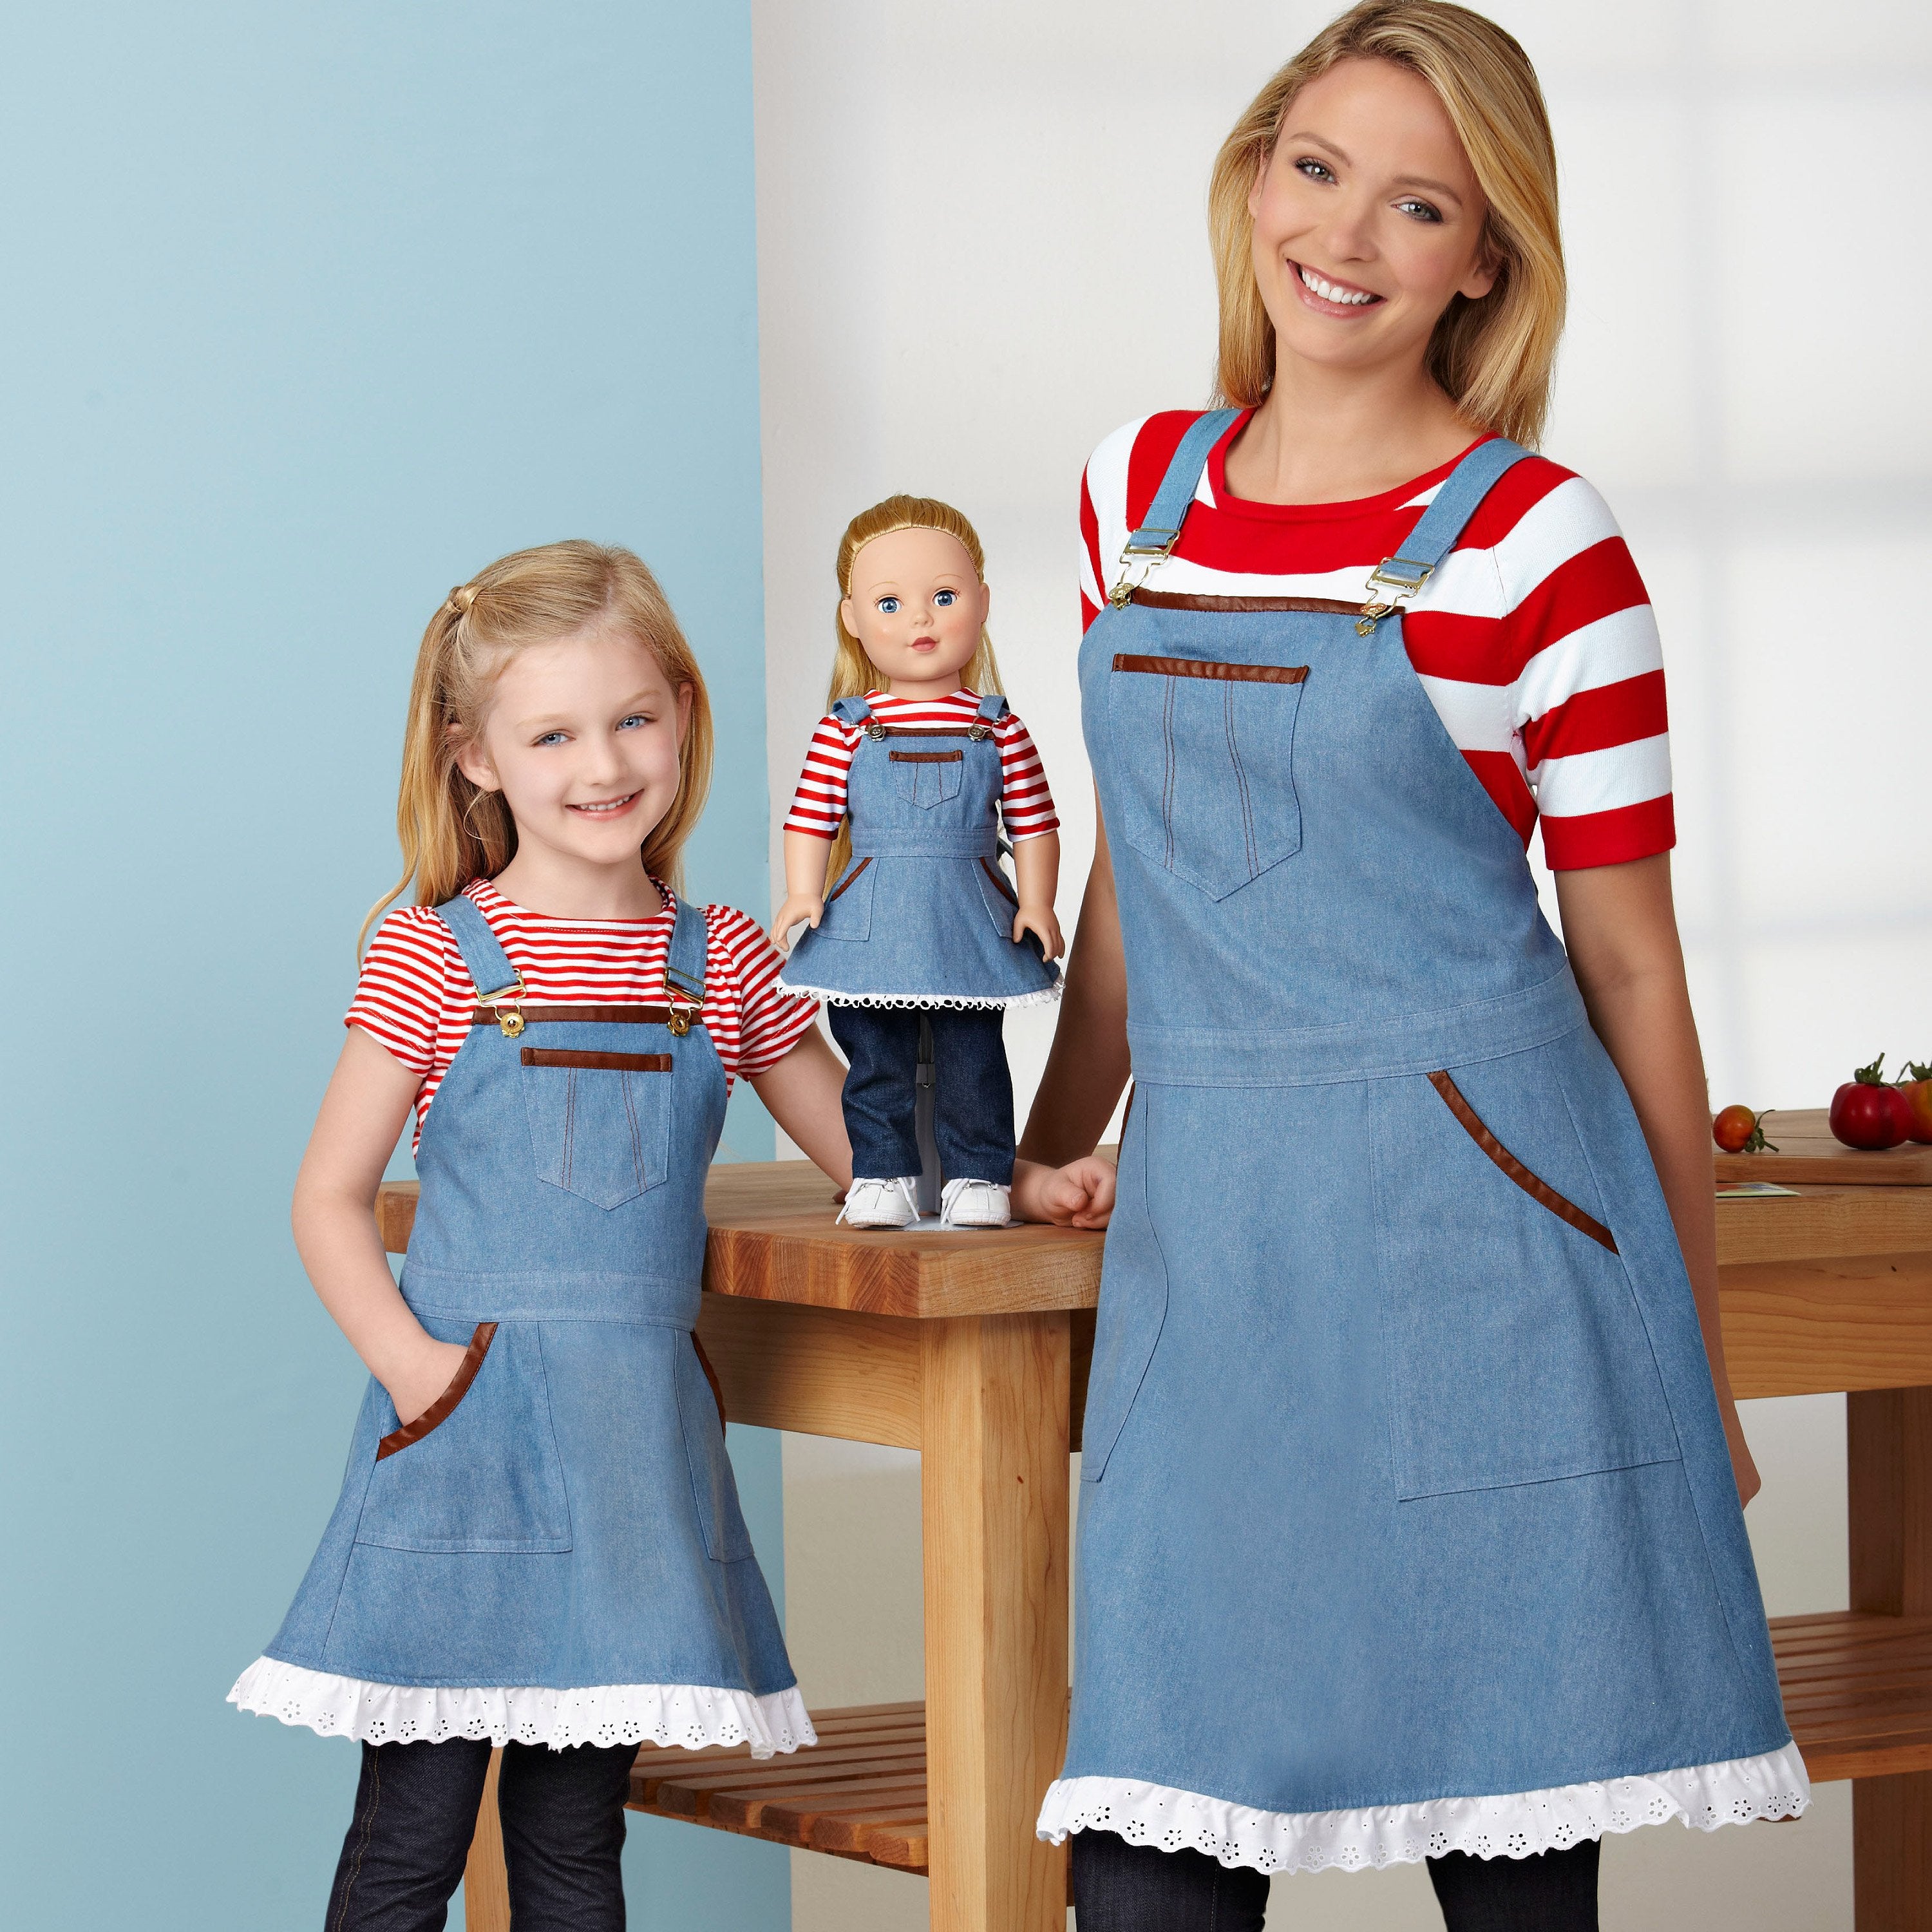 Simplicity Sewing Pattern 9395 Aprons for Misses, Children and 18" Doll from Jaycotts Sewing Supplies